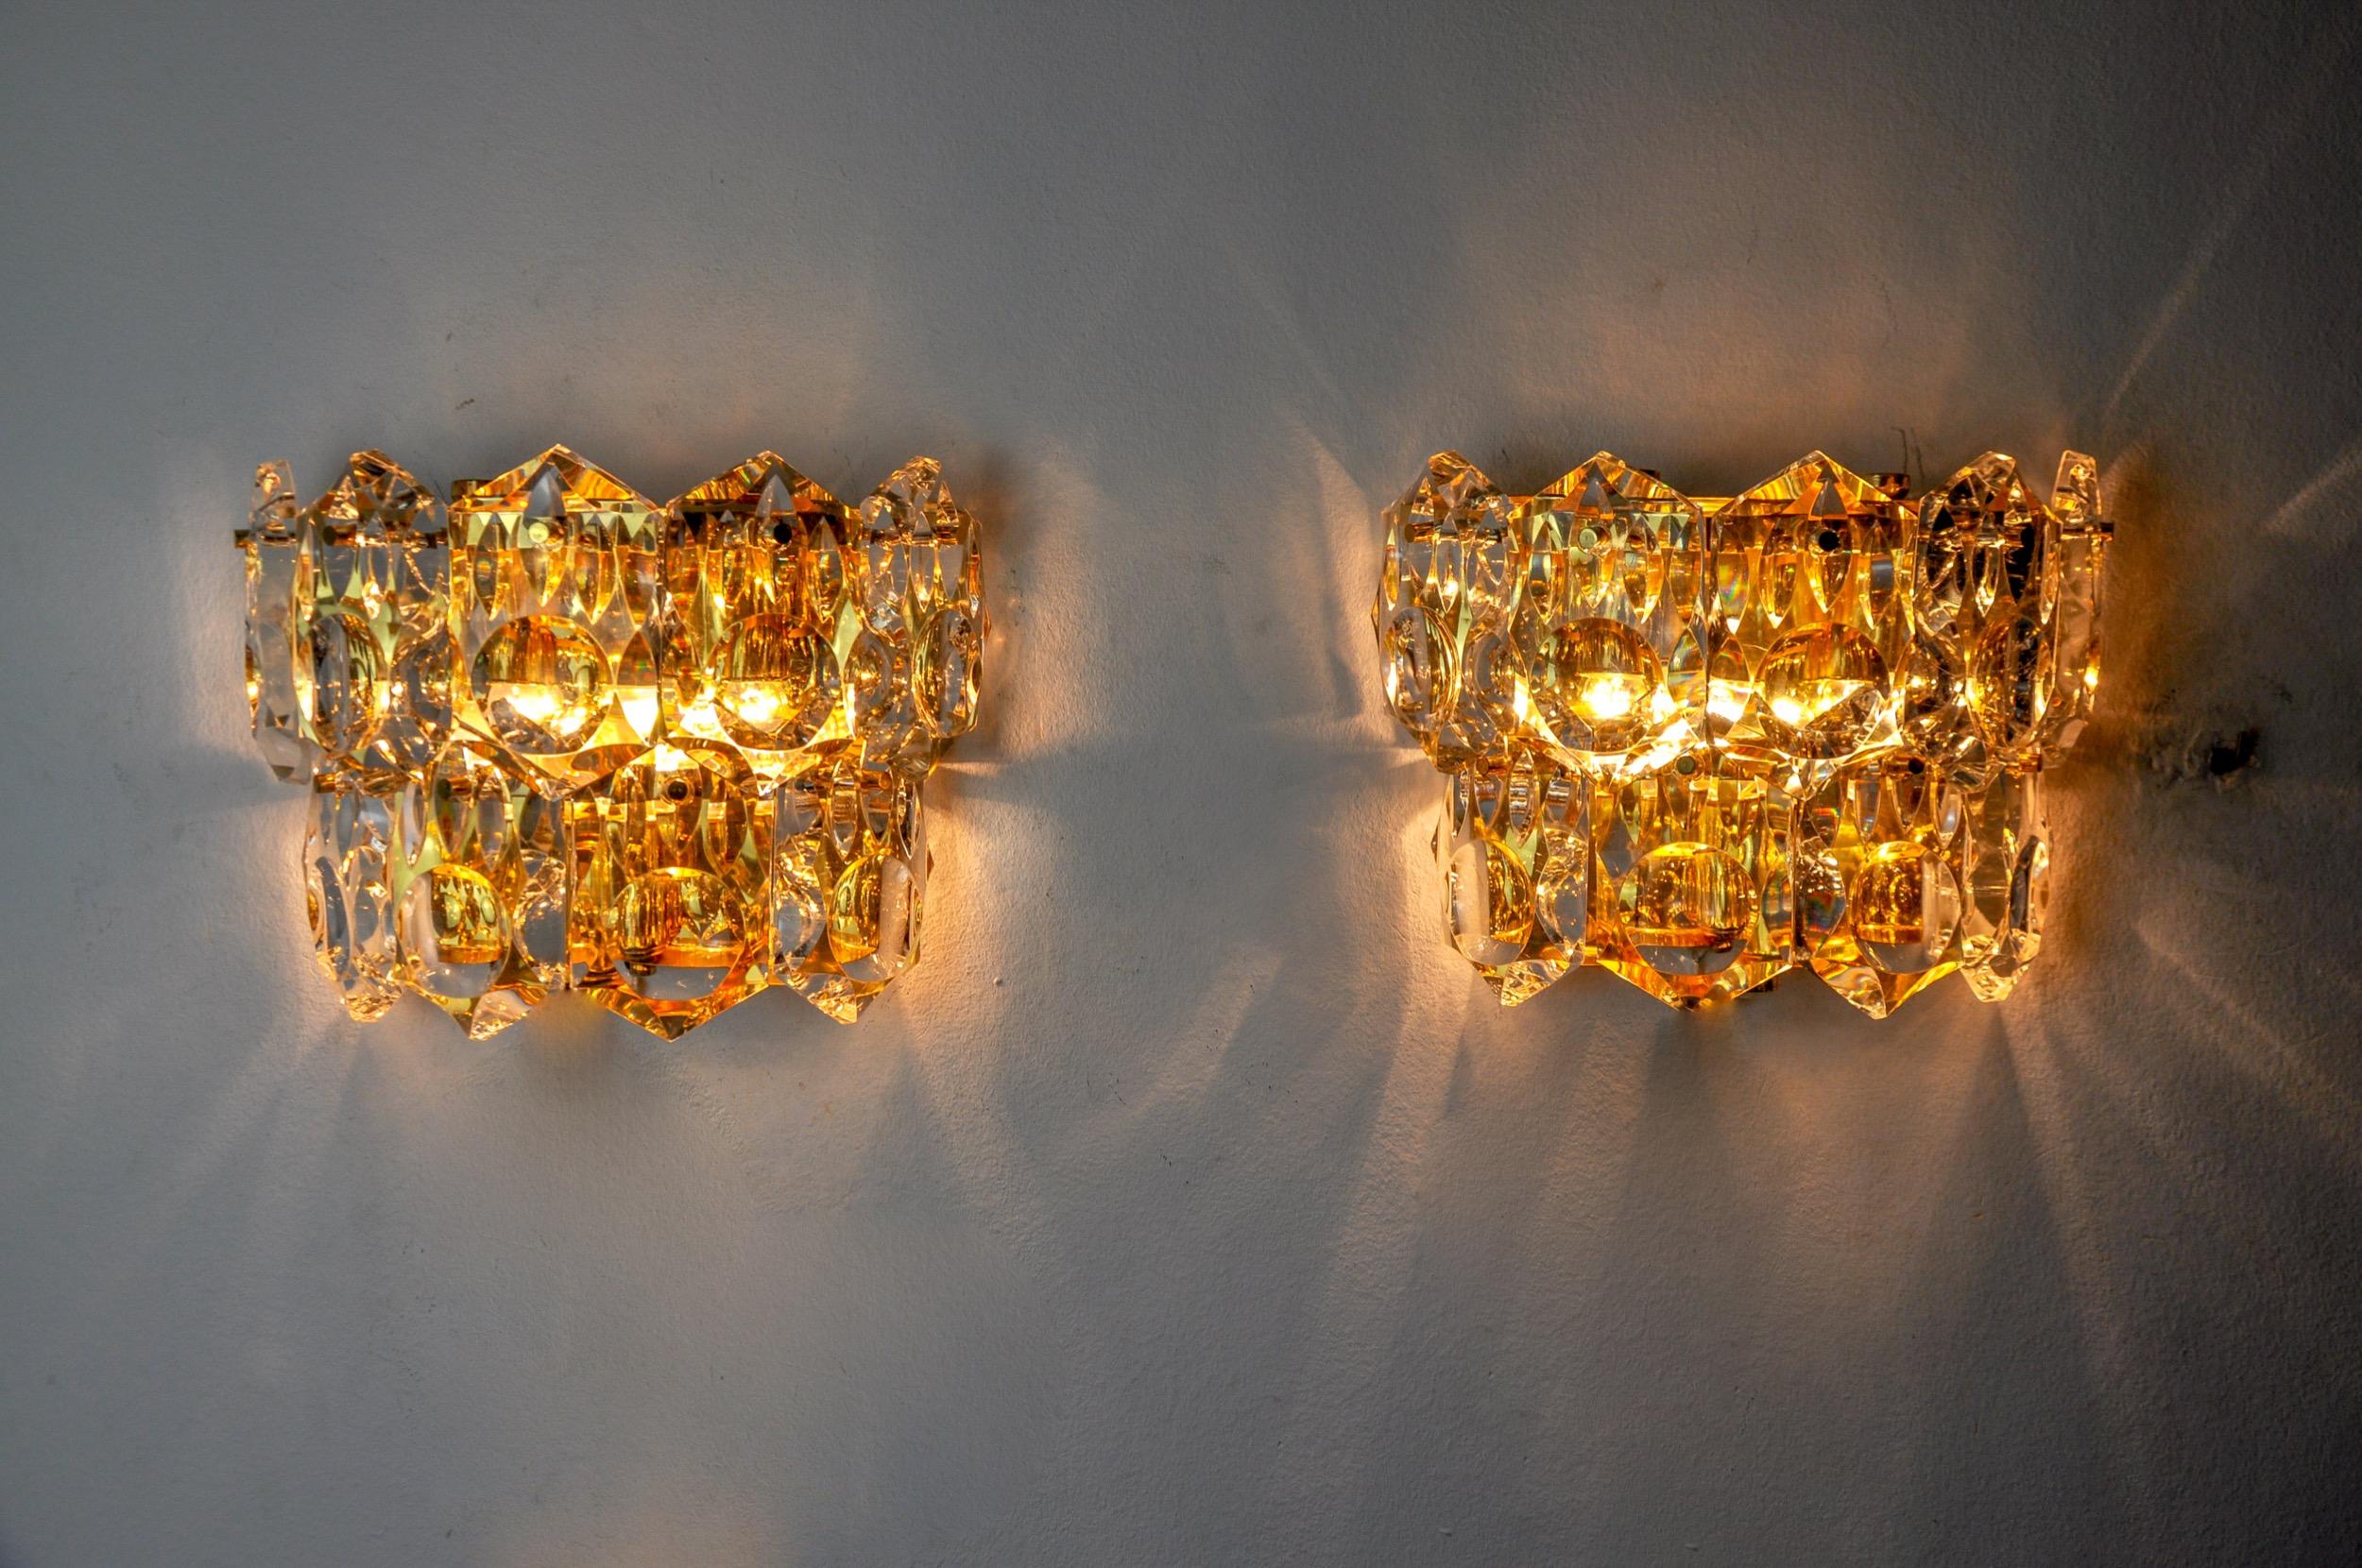 Very beautiful and rare pair of Kinkeldey wall lights designed and produced in Germany in the 1970s. Cut crystals with magnifying effect distributed over 2 levels of a golden metal structure. Rare design object that will illuminate your interior